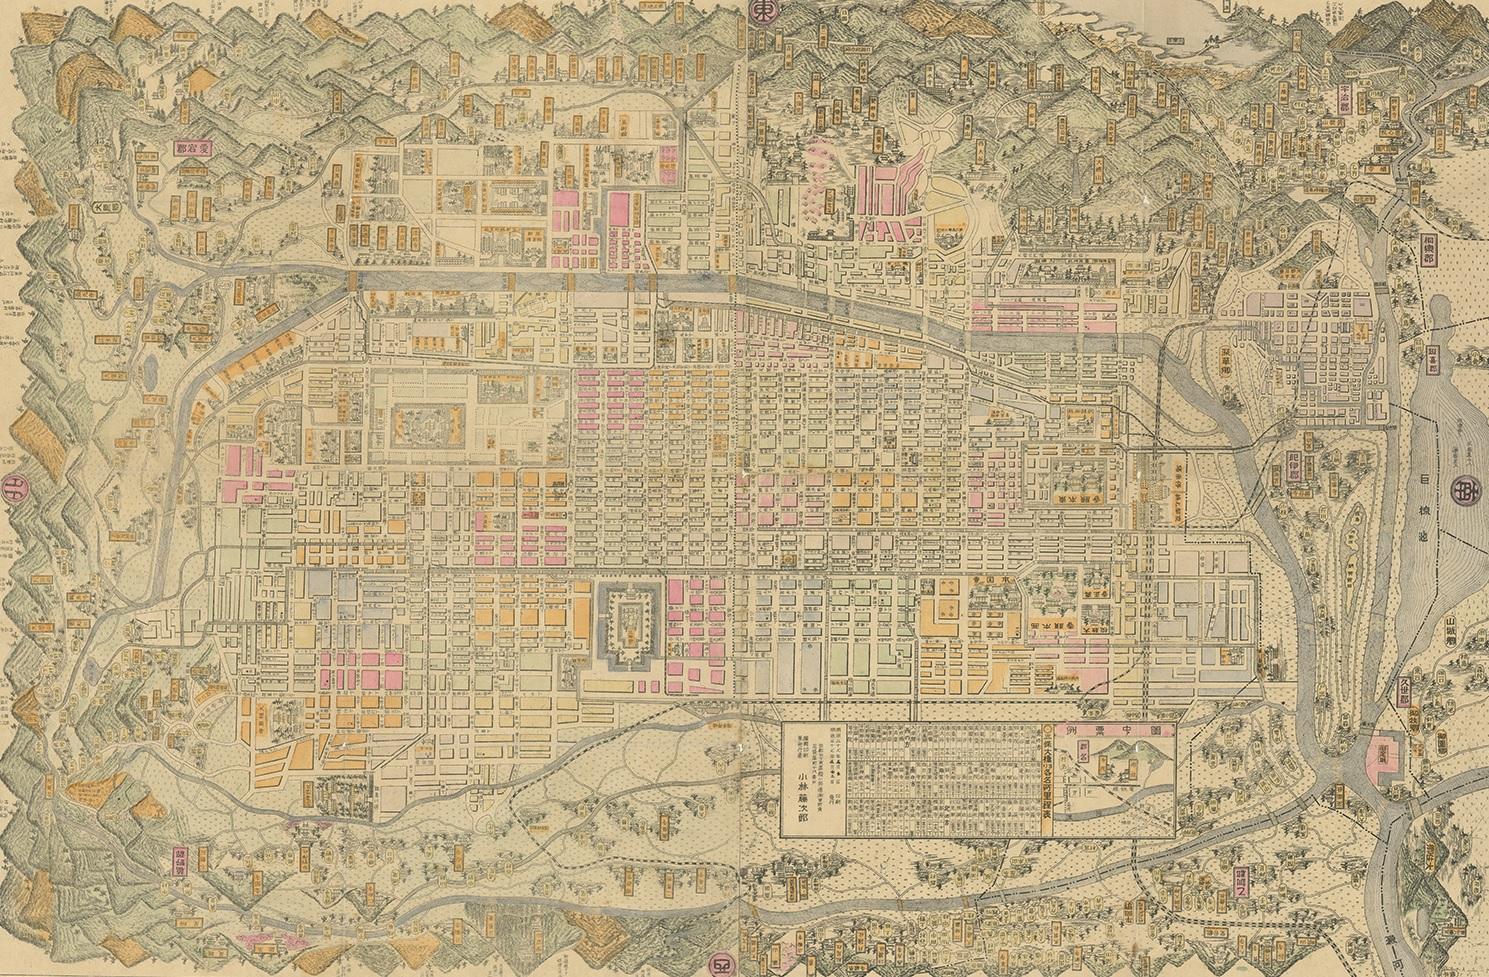 Old map of Kyoto, Japan. Published by Kobayashi, 1905.

This is an old map of Kyoto, Japan, published by Kobayashi in 1905. The map showcases a detailed layout of Kyoto during the early 20th century. Here is a description and some interesting